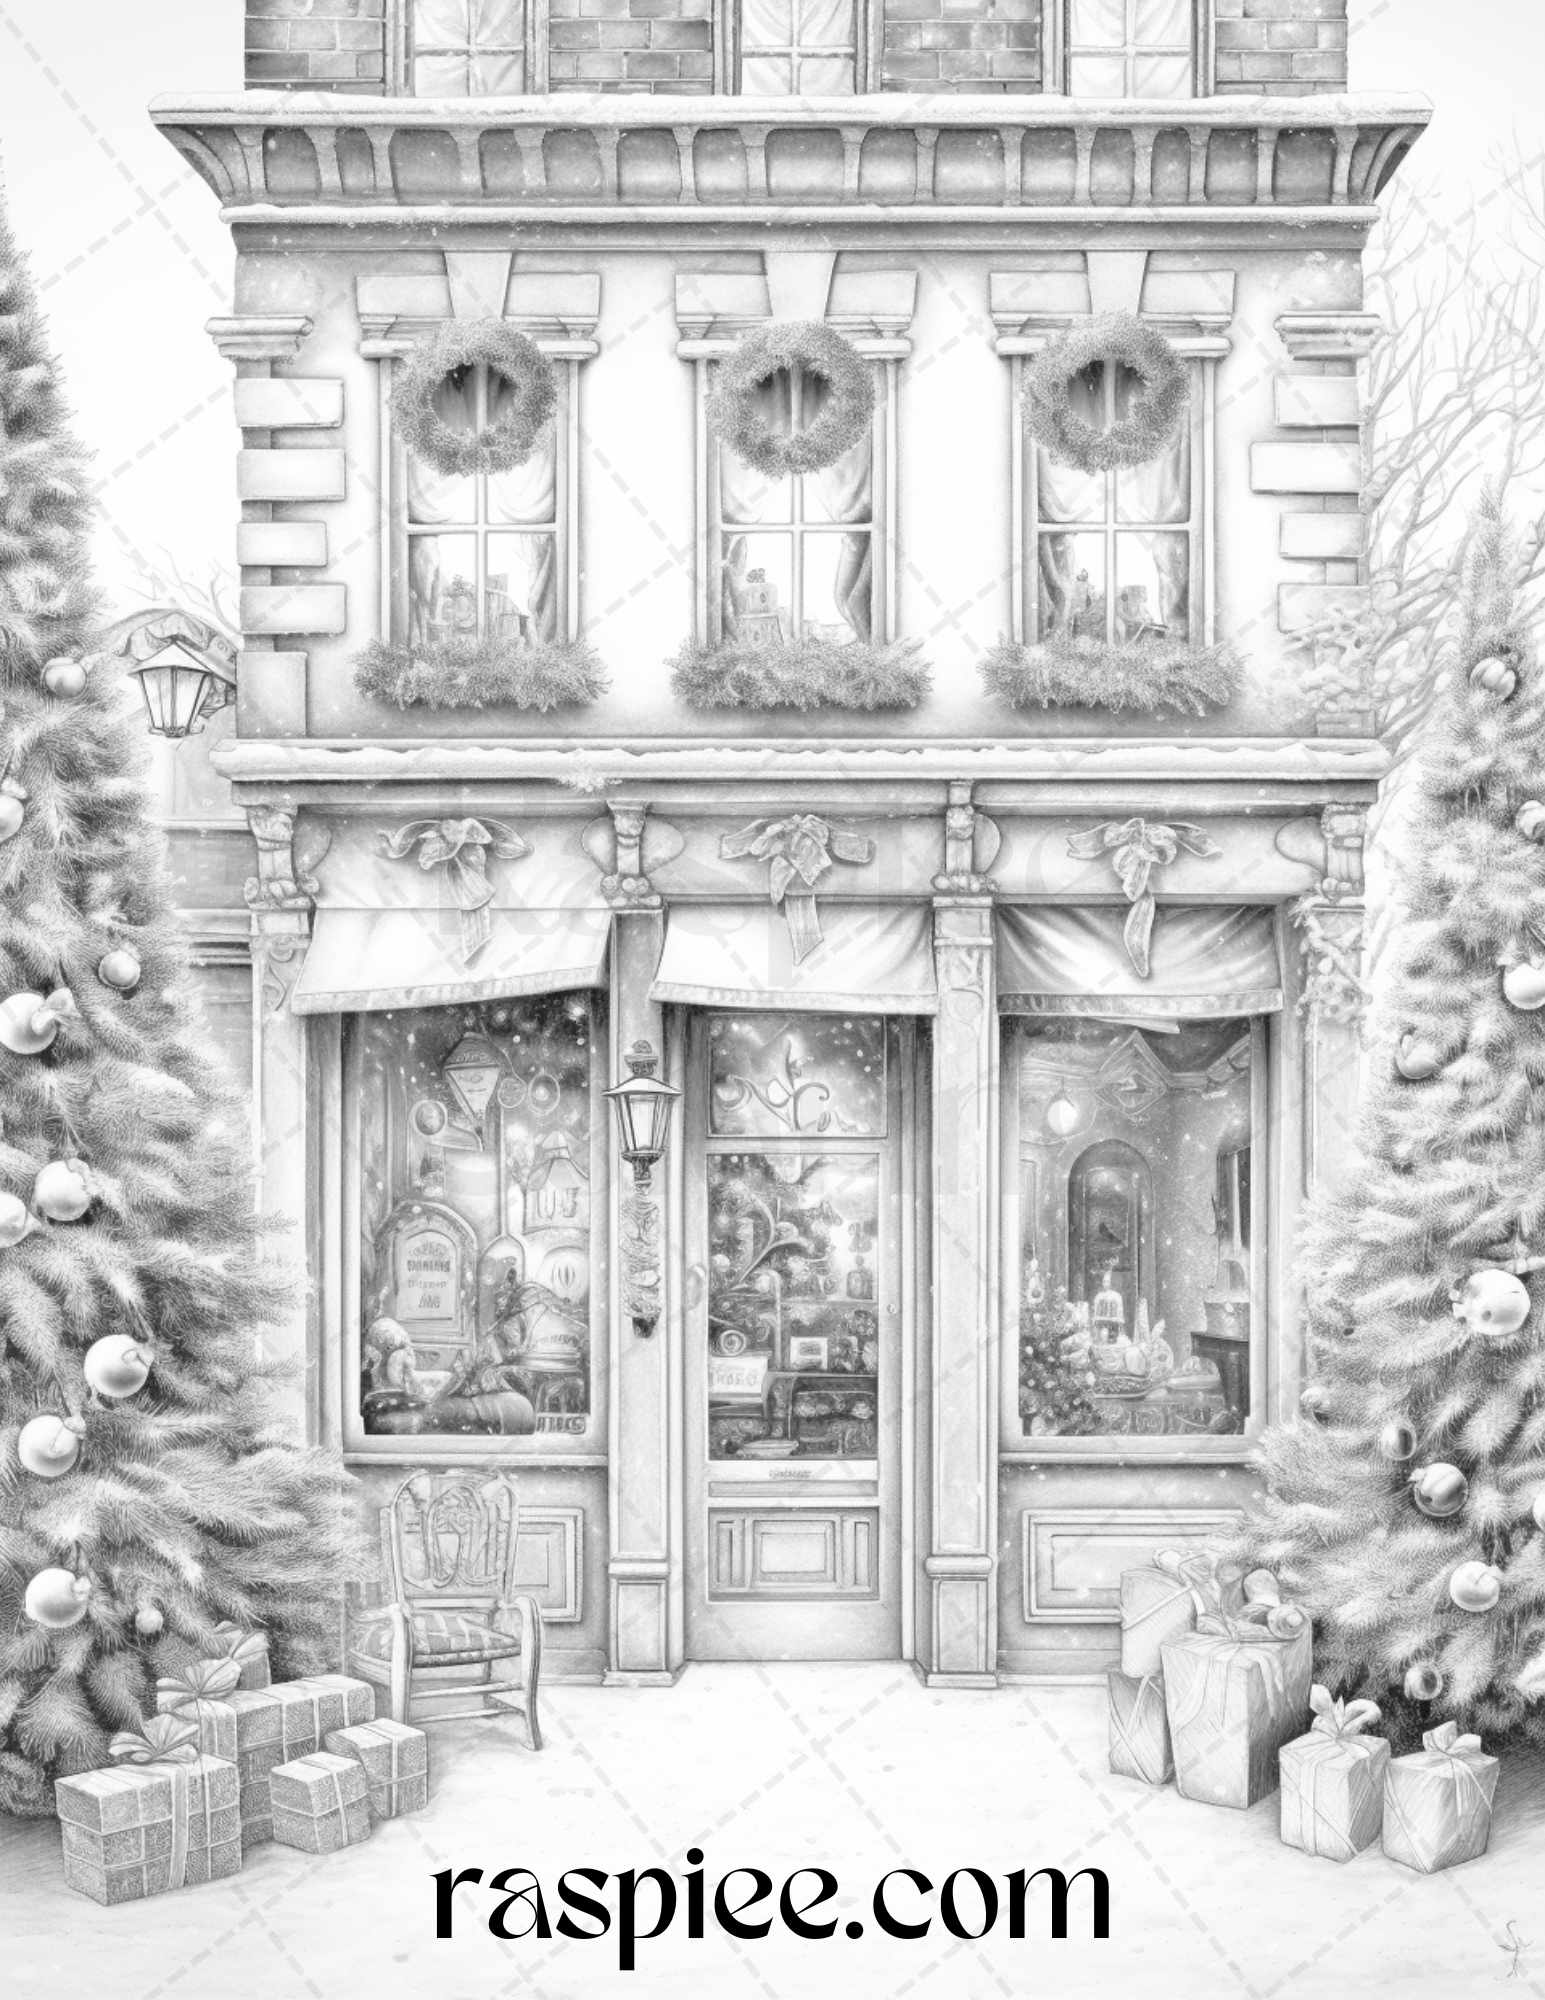 Christmas grayscale coloring page for adults, Adult coloring sheet winter decoration, Detailed winter coloring page instant download, DIY holiday craft coloring activity, Relaxing winter coloring for adults, Printable Christmas decorations to color, Seasonal adult coloring fun download, Festive grayscale holiday coloring design